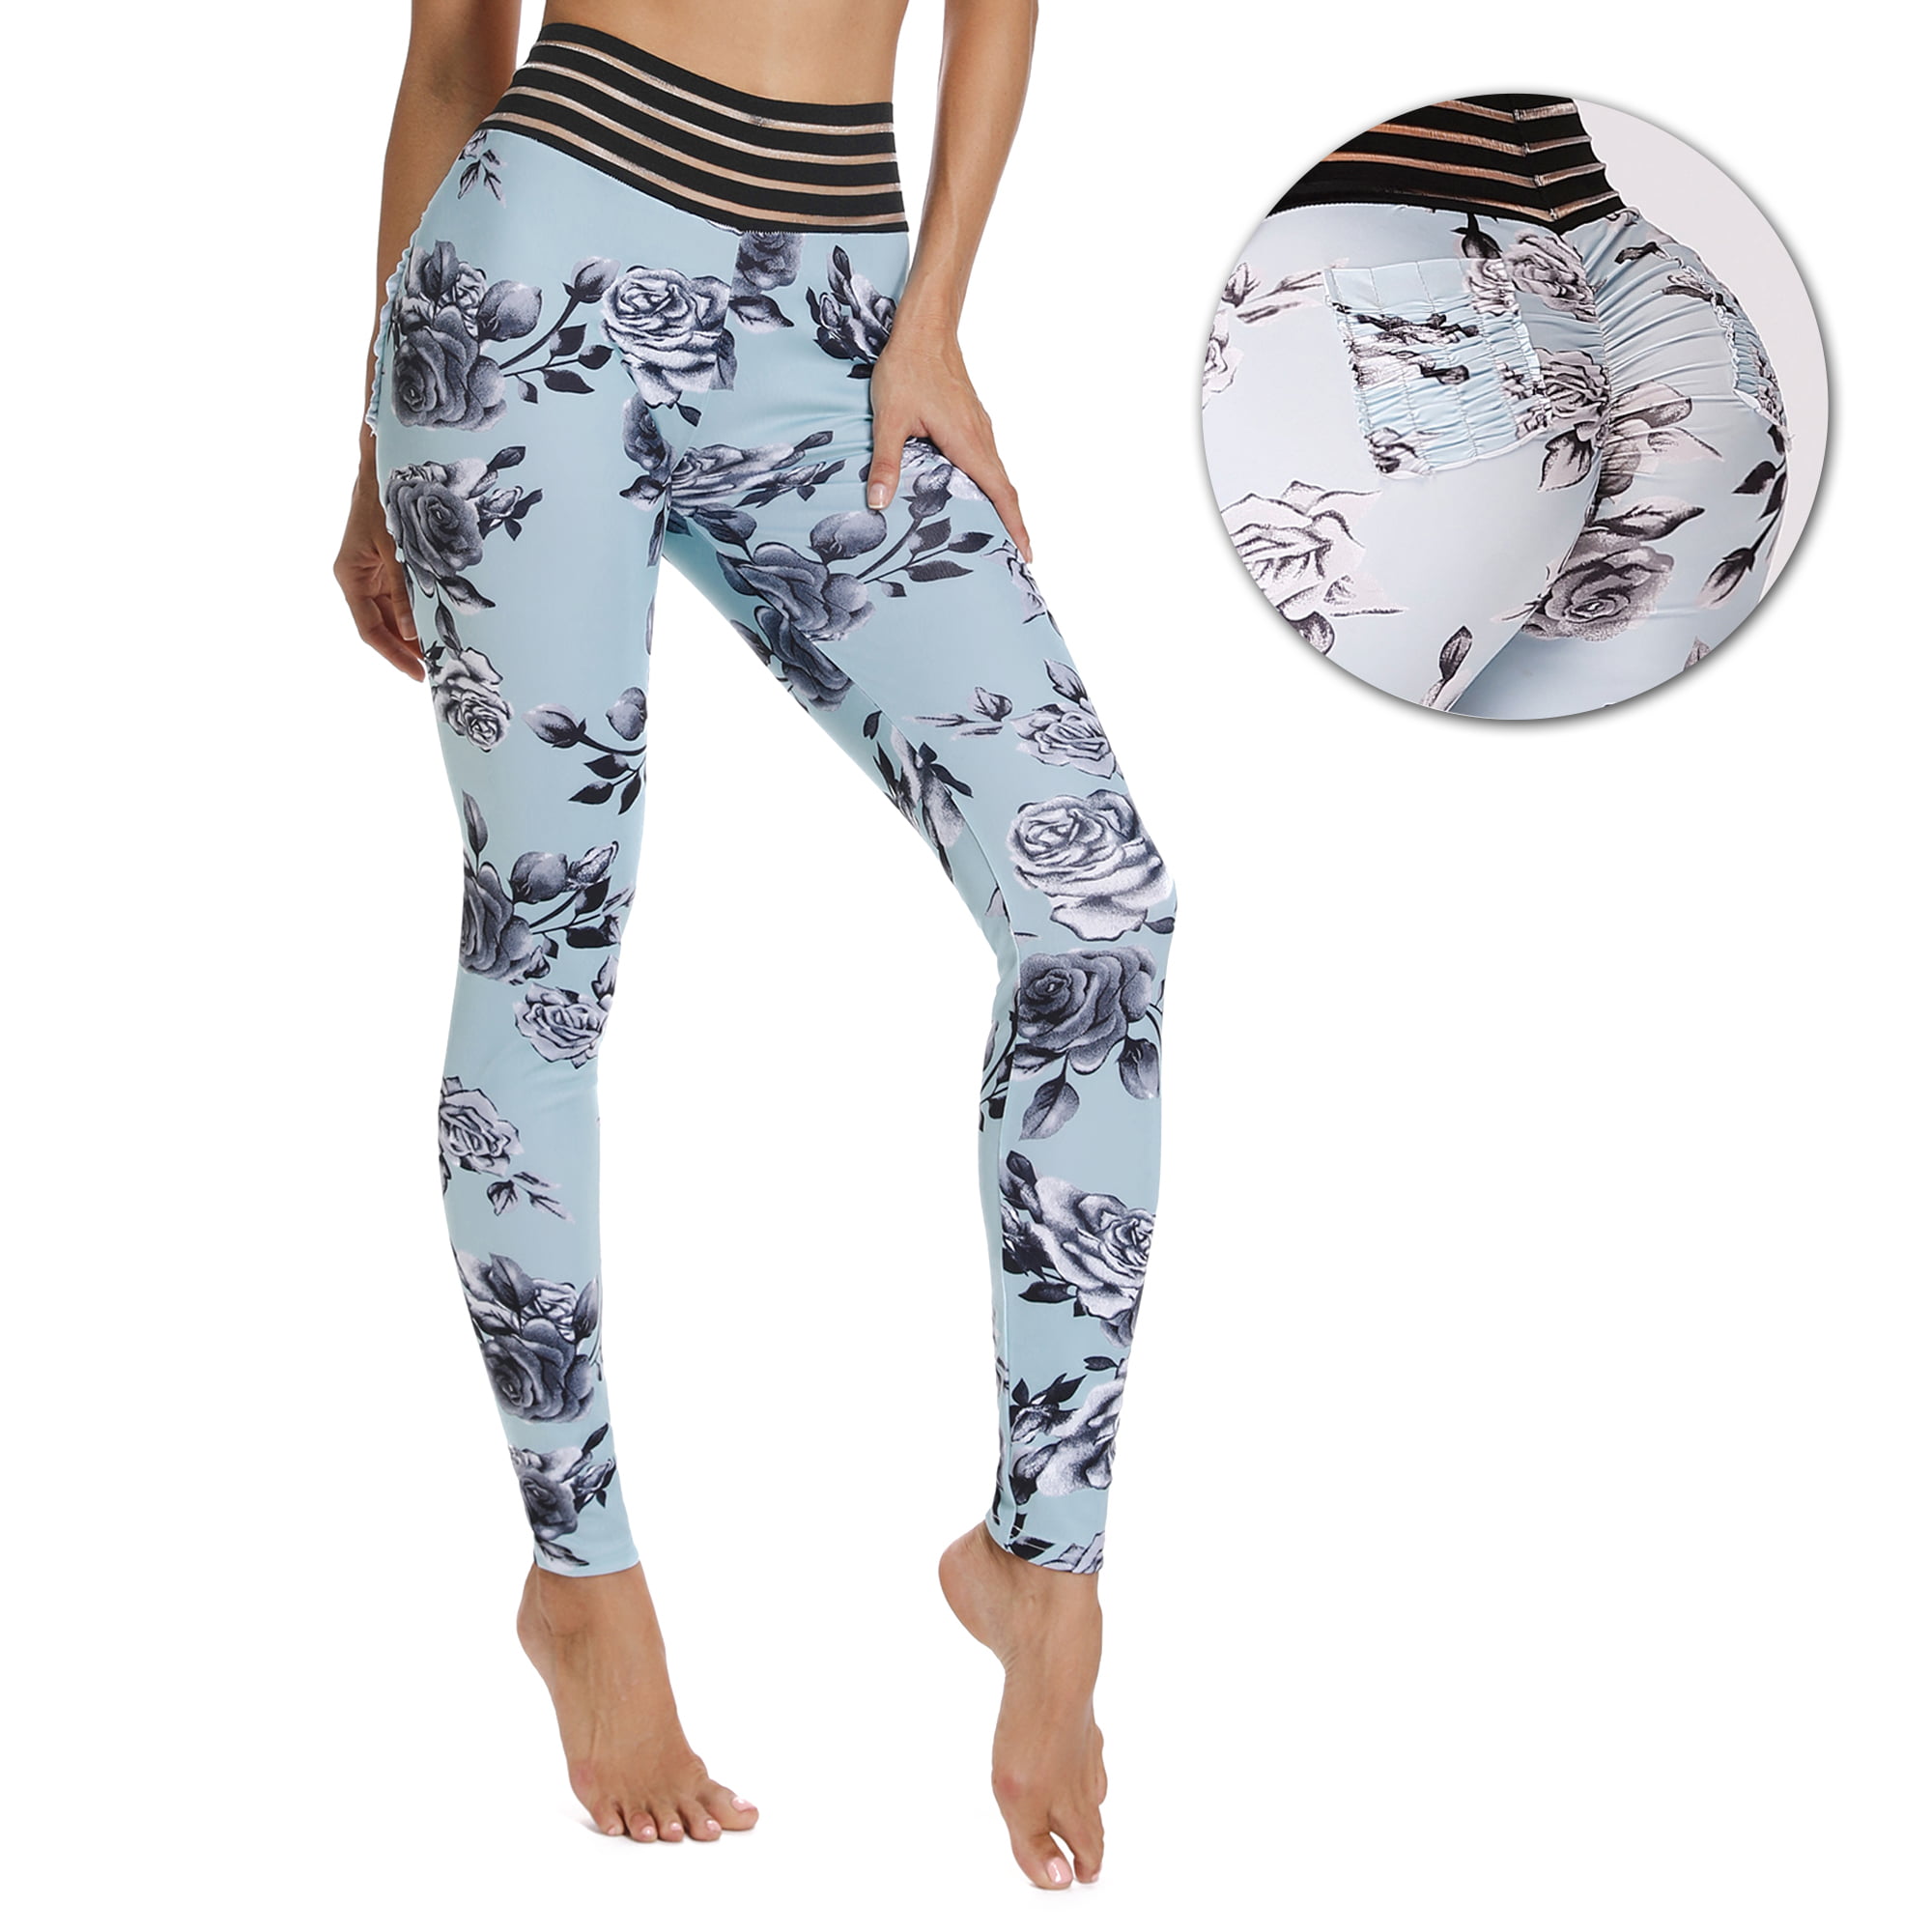 Details about   Womens High Waist Yoga Pants Leggings Butt Lift Floral Fitness Gym Trousers 